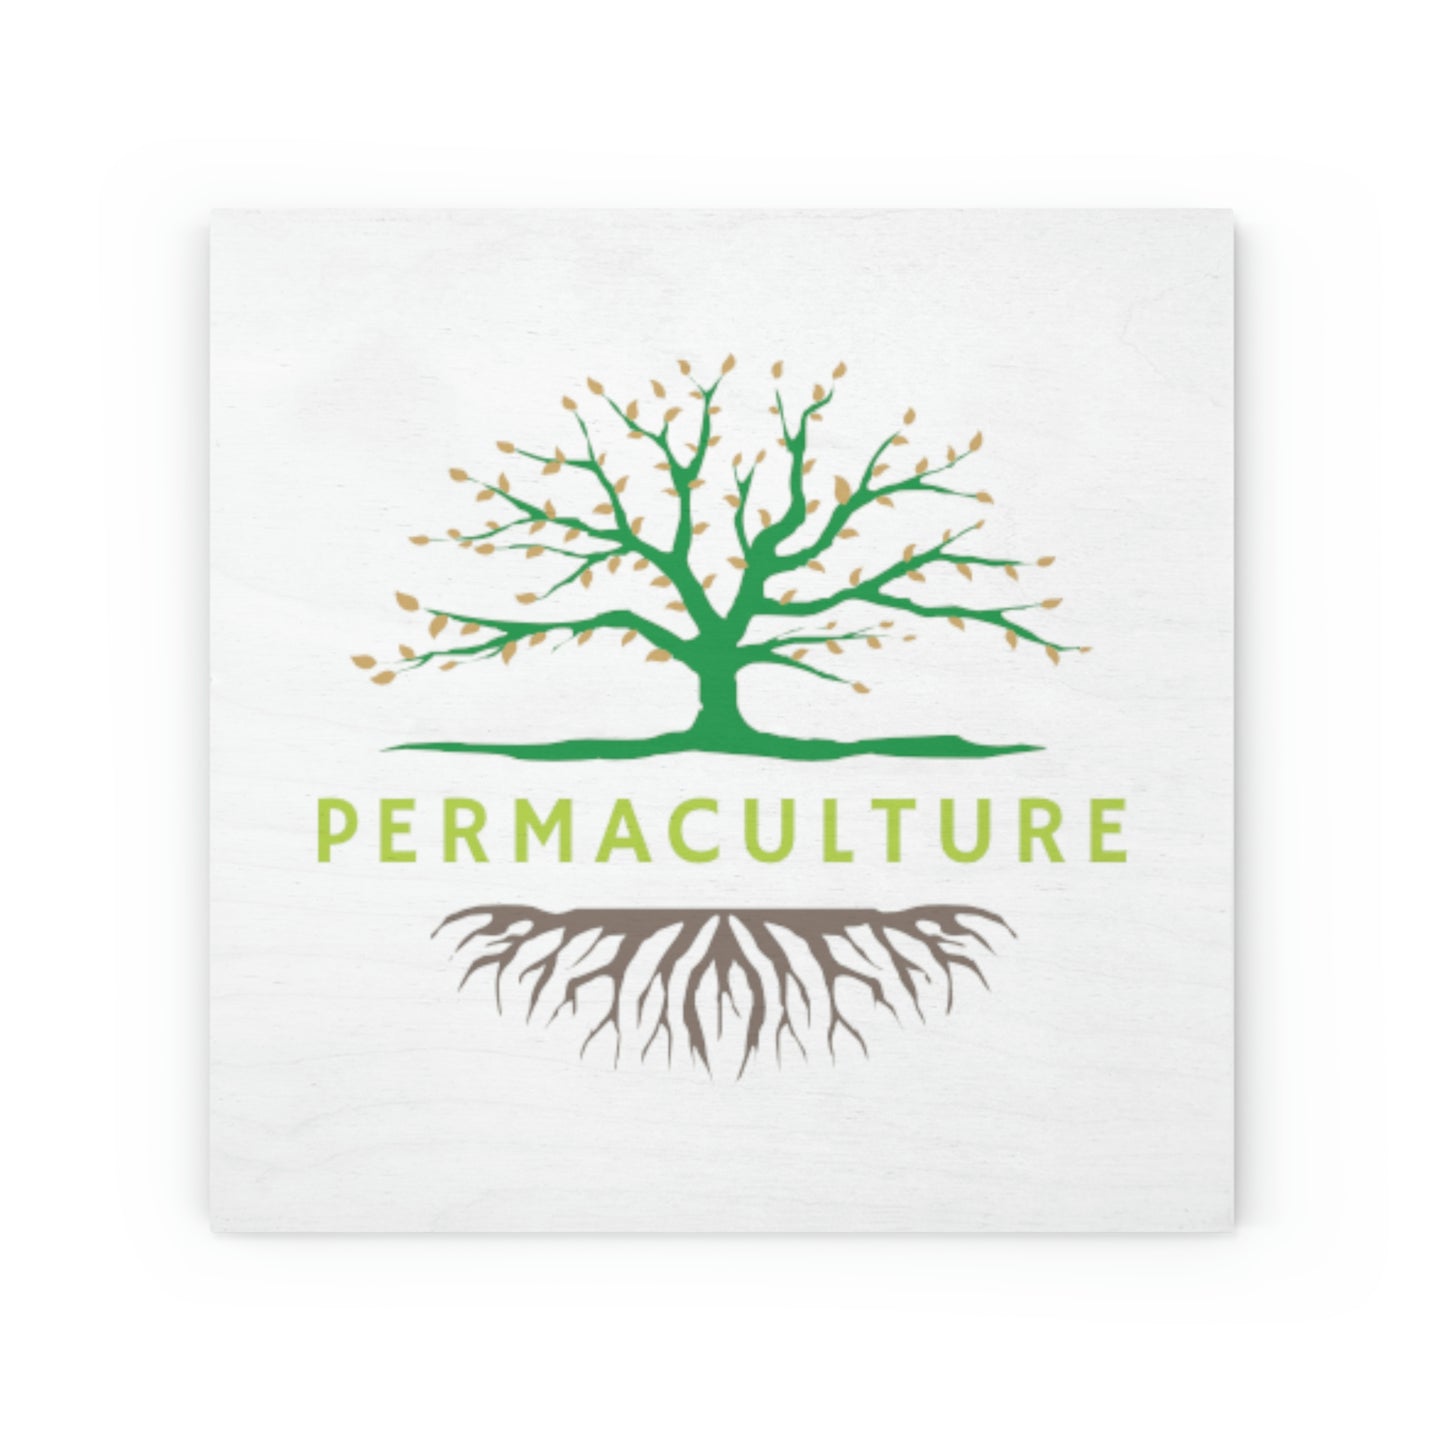 Wood Canvas - Permaculture - White